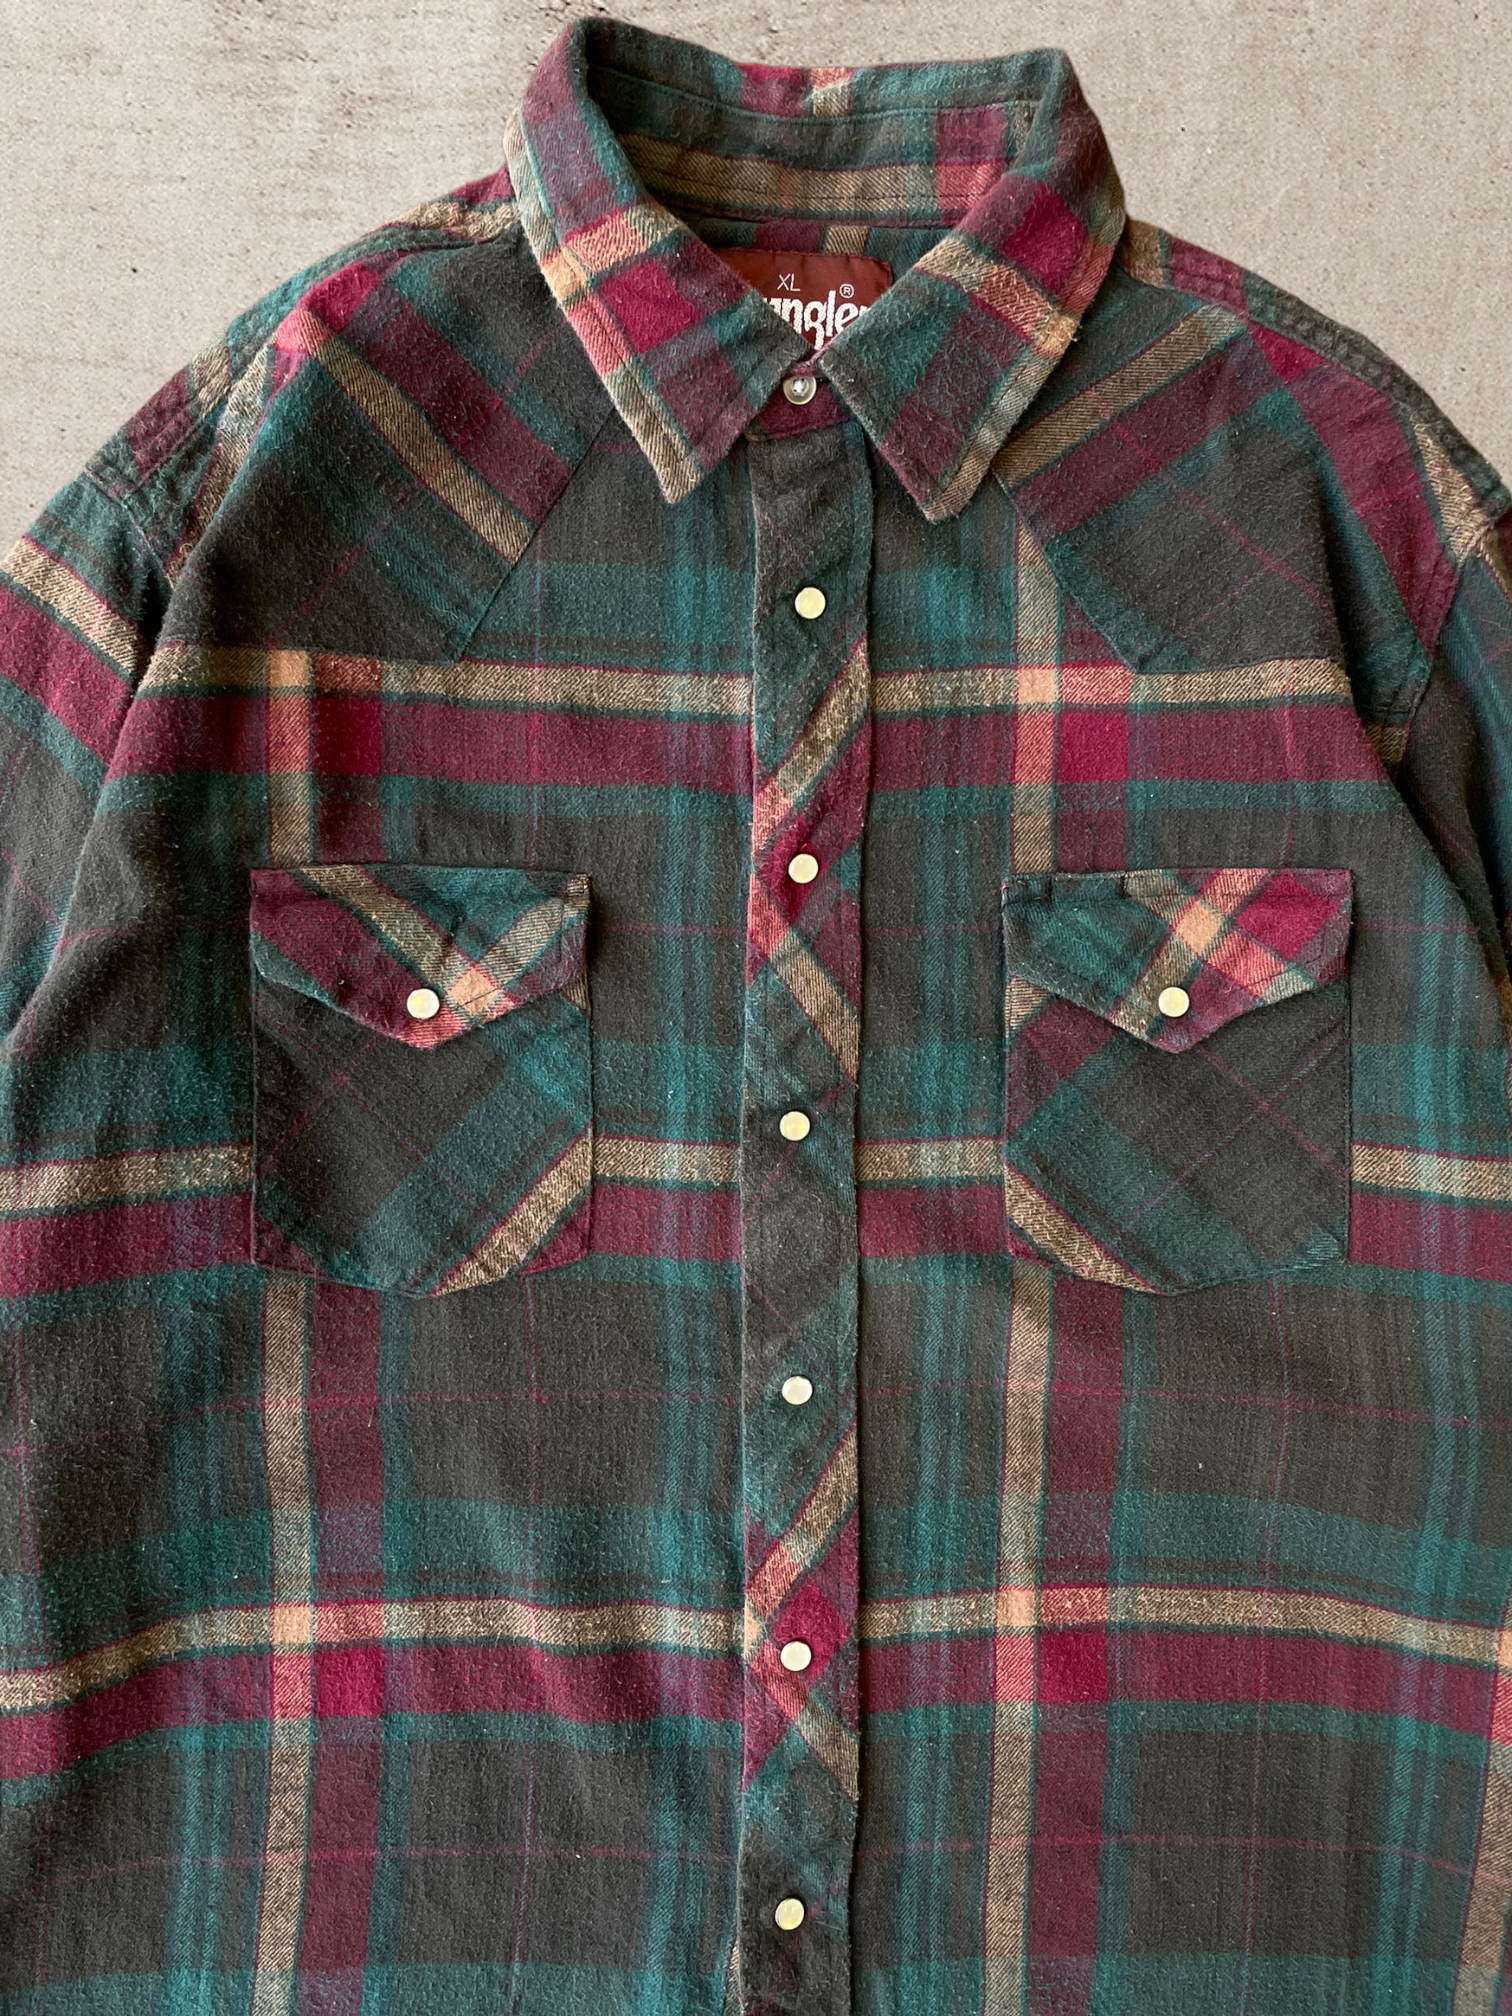 90s Wrangler Western Pearl Snap Flannel - X-Large